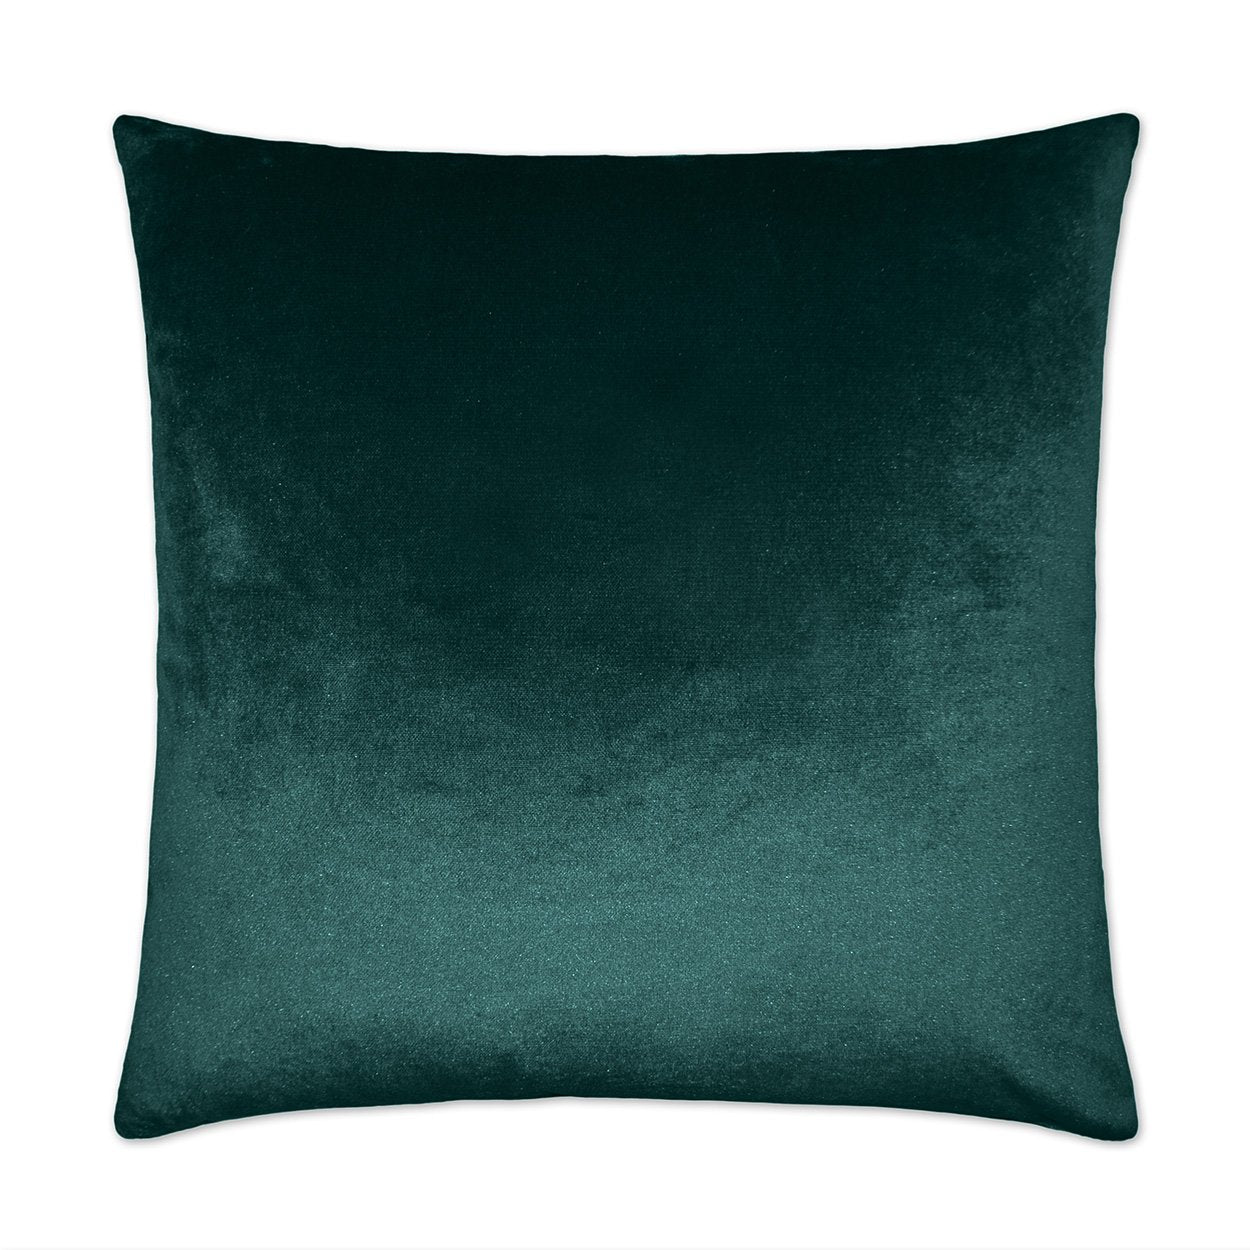 Luxury Pillow - 24” x 24” - Belvedere Laguna; Dark Teal color in a soft solid velvet fabric